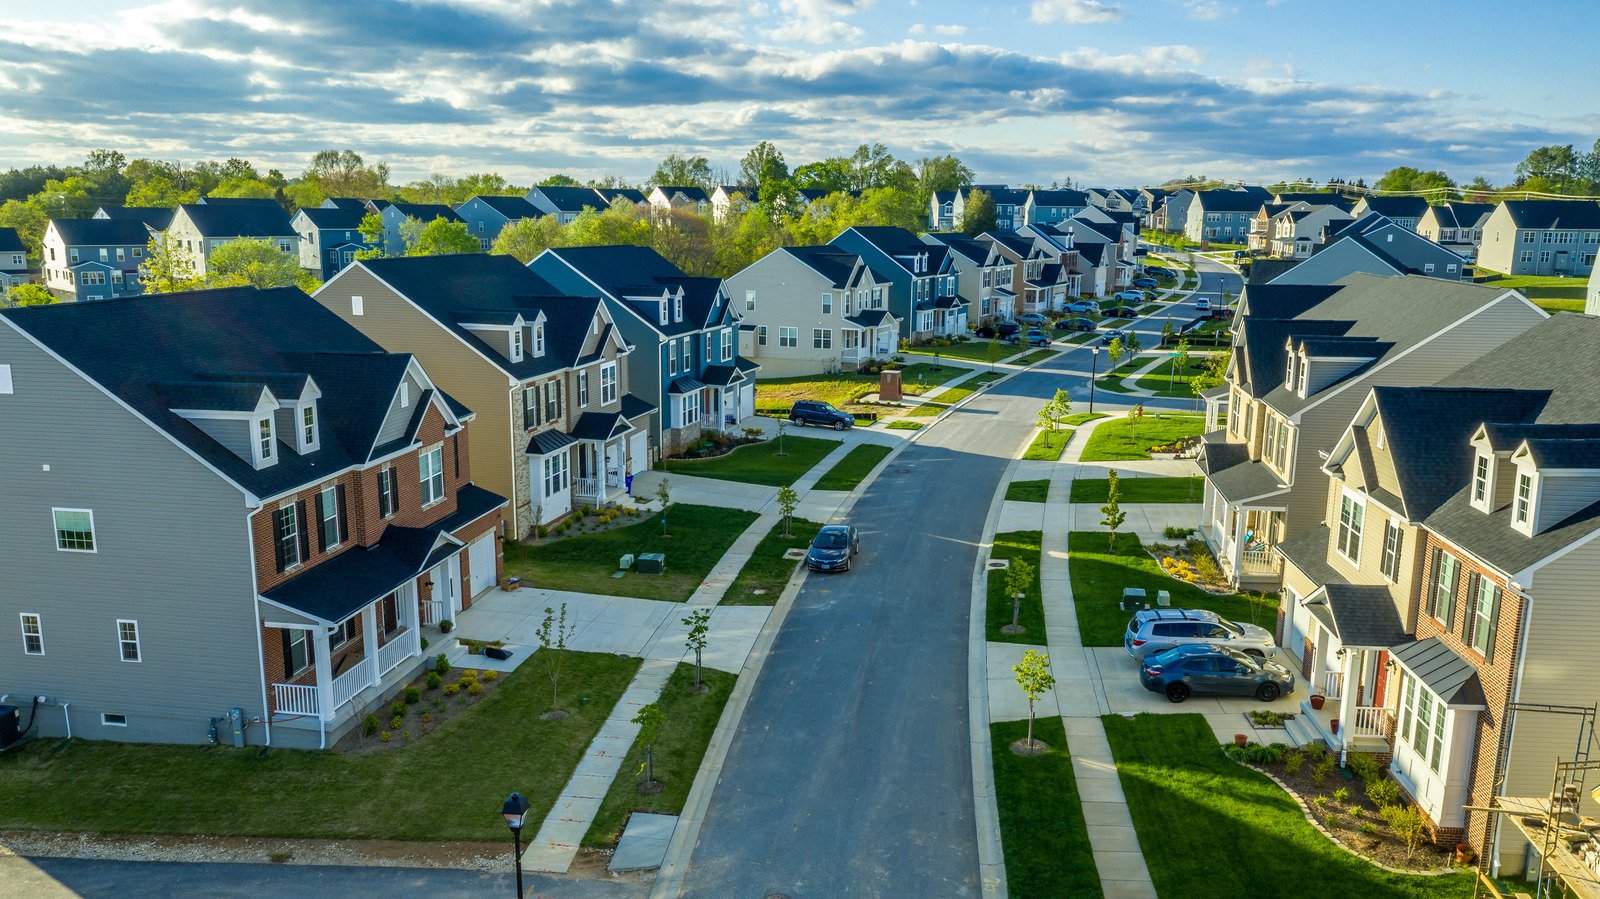 5 Expertly Designed Neighborhoods That Will Make You Want To Live There